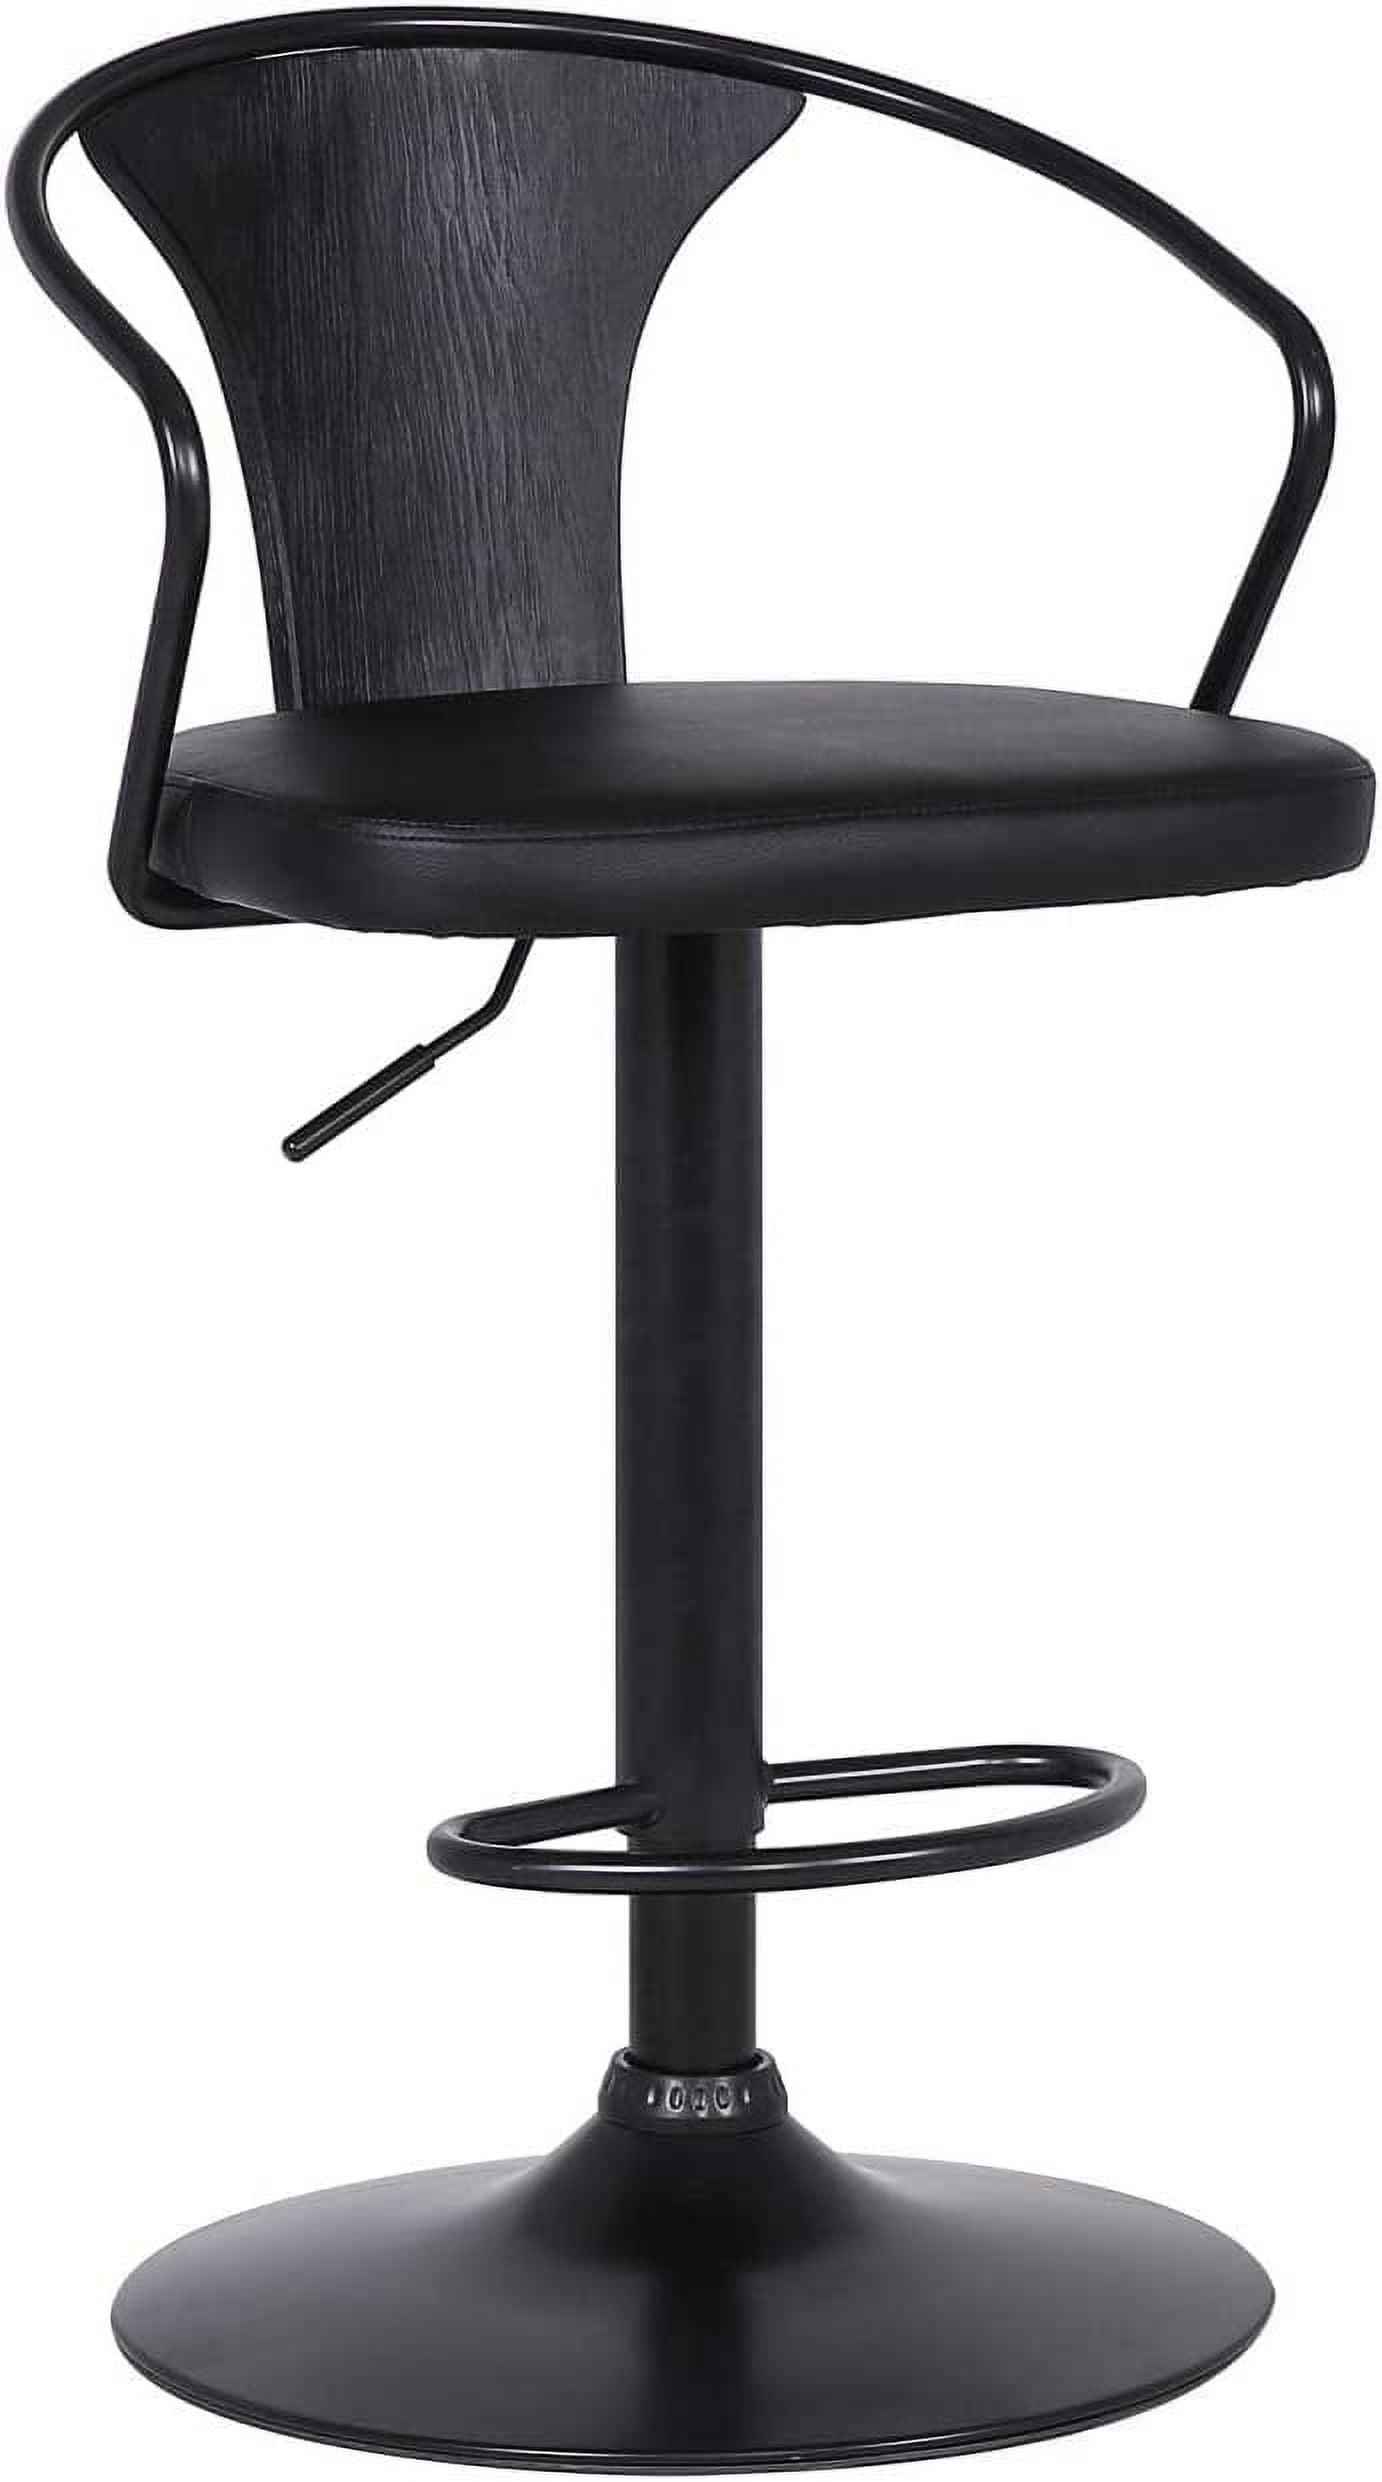 Eagle Contemporary Adjustable Swivel Barstool in Black Leather and Metal